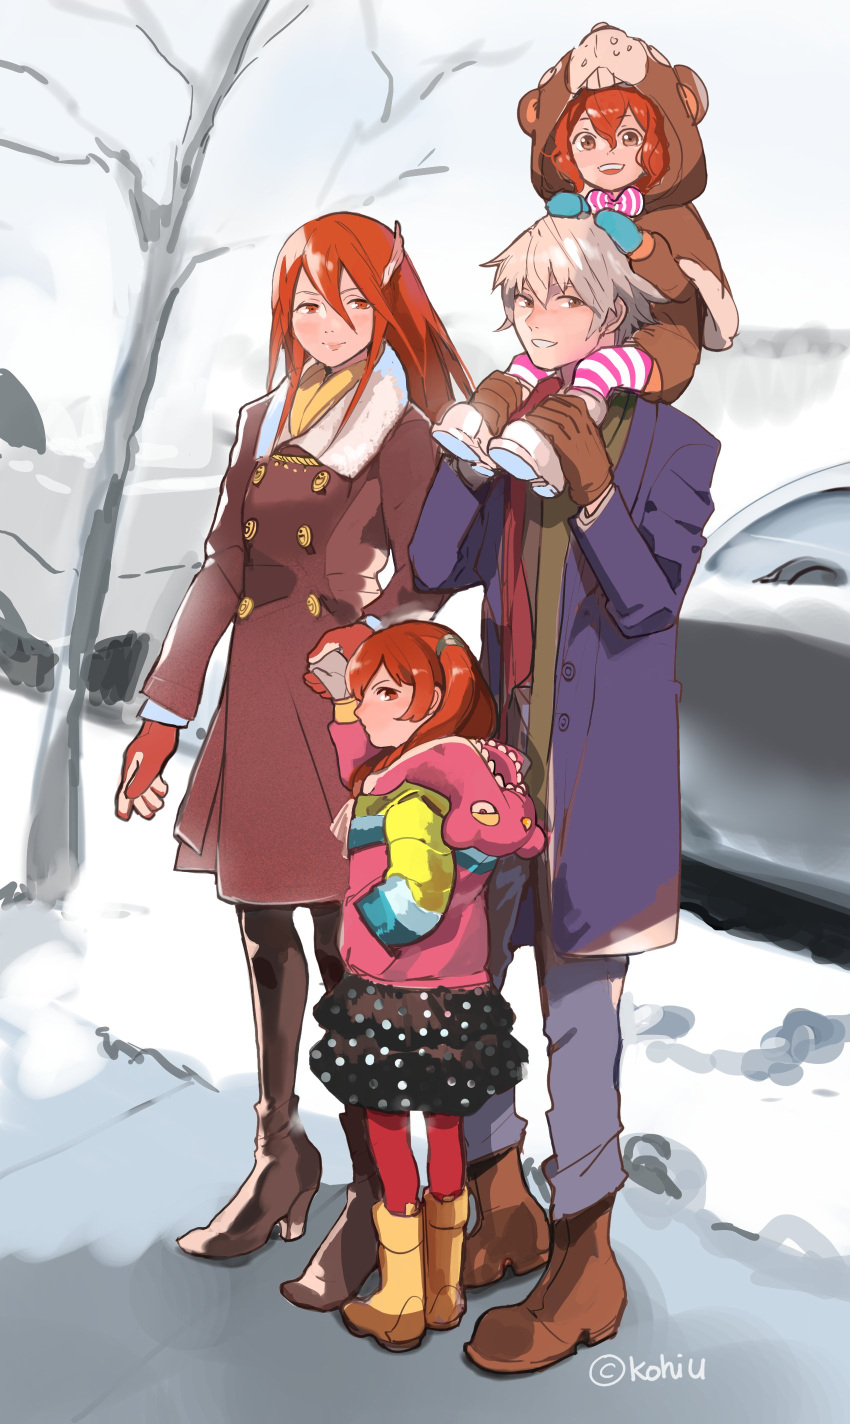 1boy 3girls absurdres armor blush carrying father_and_daughter fire_emblem fire_emblem:_kakusei gloves highres hood husband_and_wife jacket kohiu long_hair male_my_unit_(fire_emblem:_kakusei) mark_(fire_emblem) mother_and_daughter multiple_girls my_unit_(fire_emblem:_kakusei) open_mouth pantyhose red_eyes redhead selena_(fire_emblem) short_hair smile snow cordelia_(fire_emblem) twintails white_hair winter_clothes younger